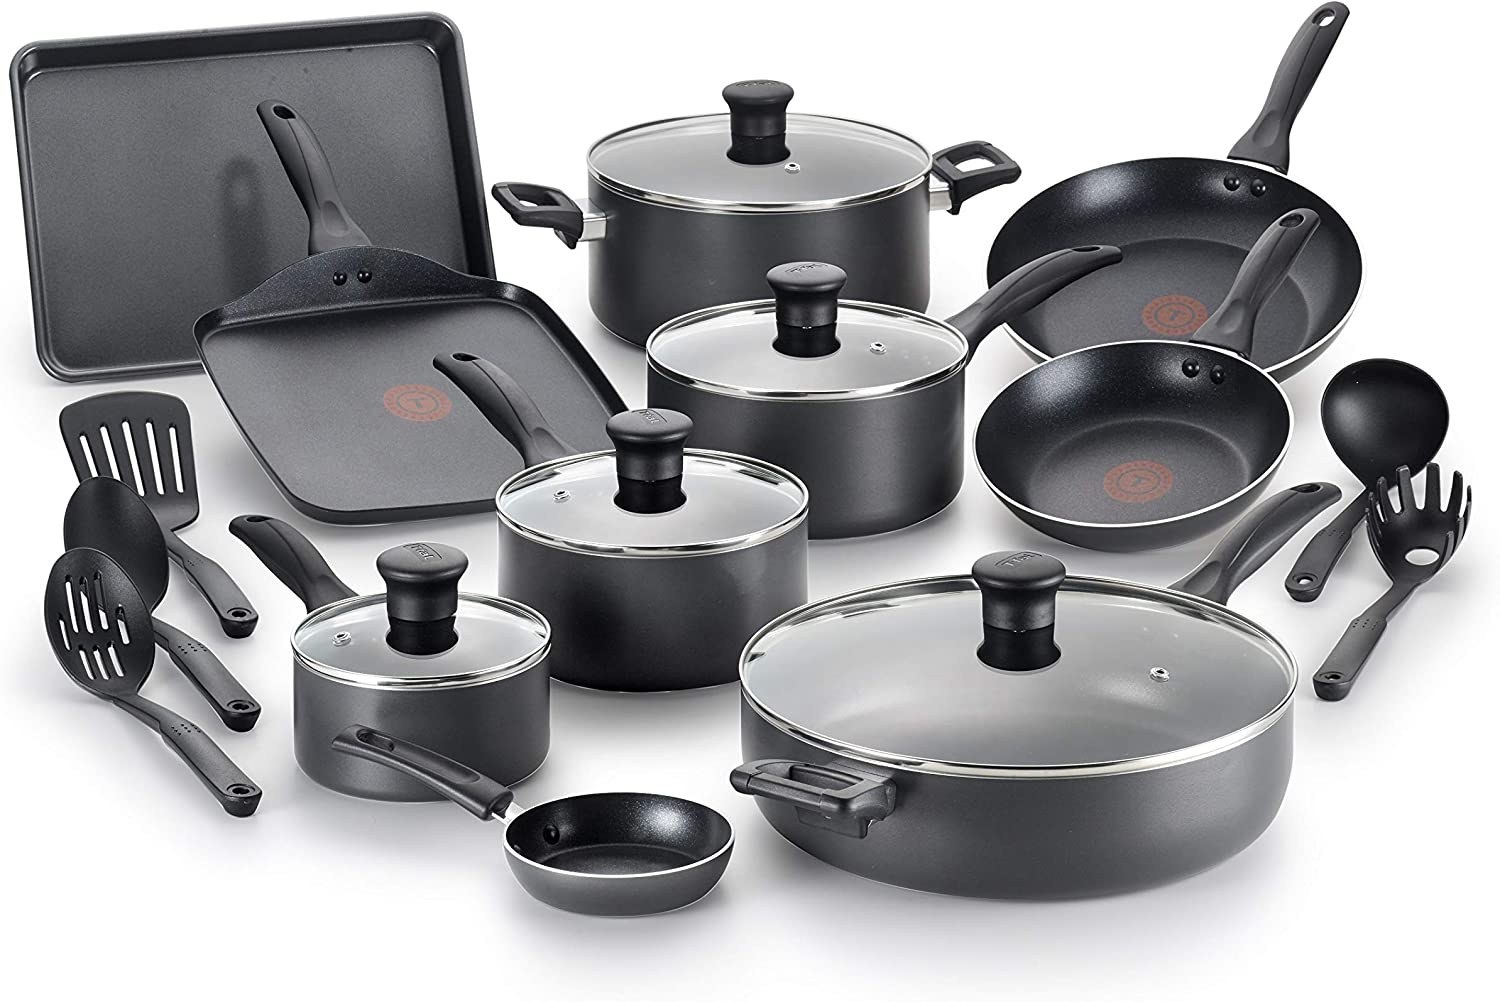 CAROTE 15pcs Pots and Pans Set, Nonstick Induction Kitchen RV Cookware Set  with Removable Handle, Dishwasher/Oven Safe